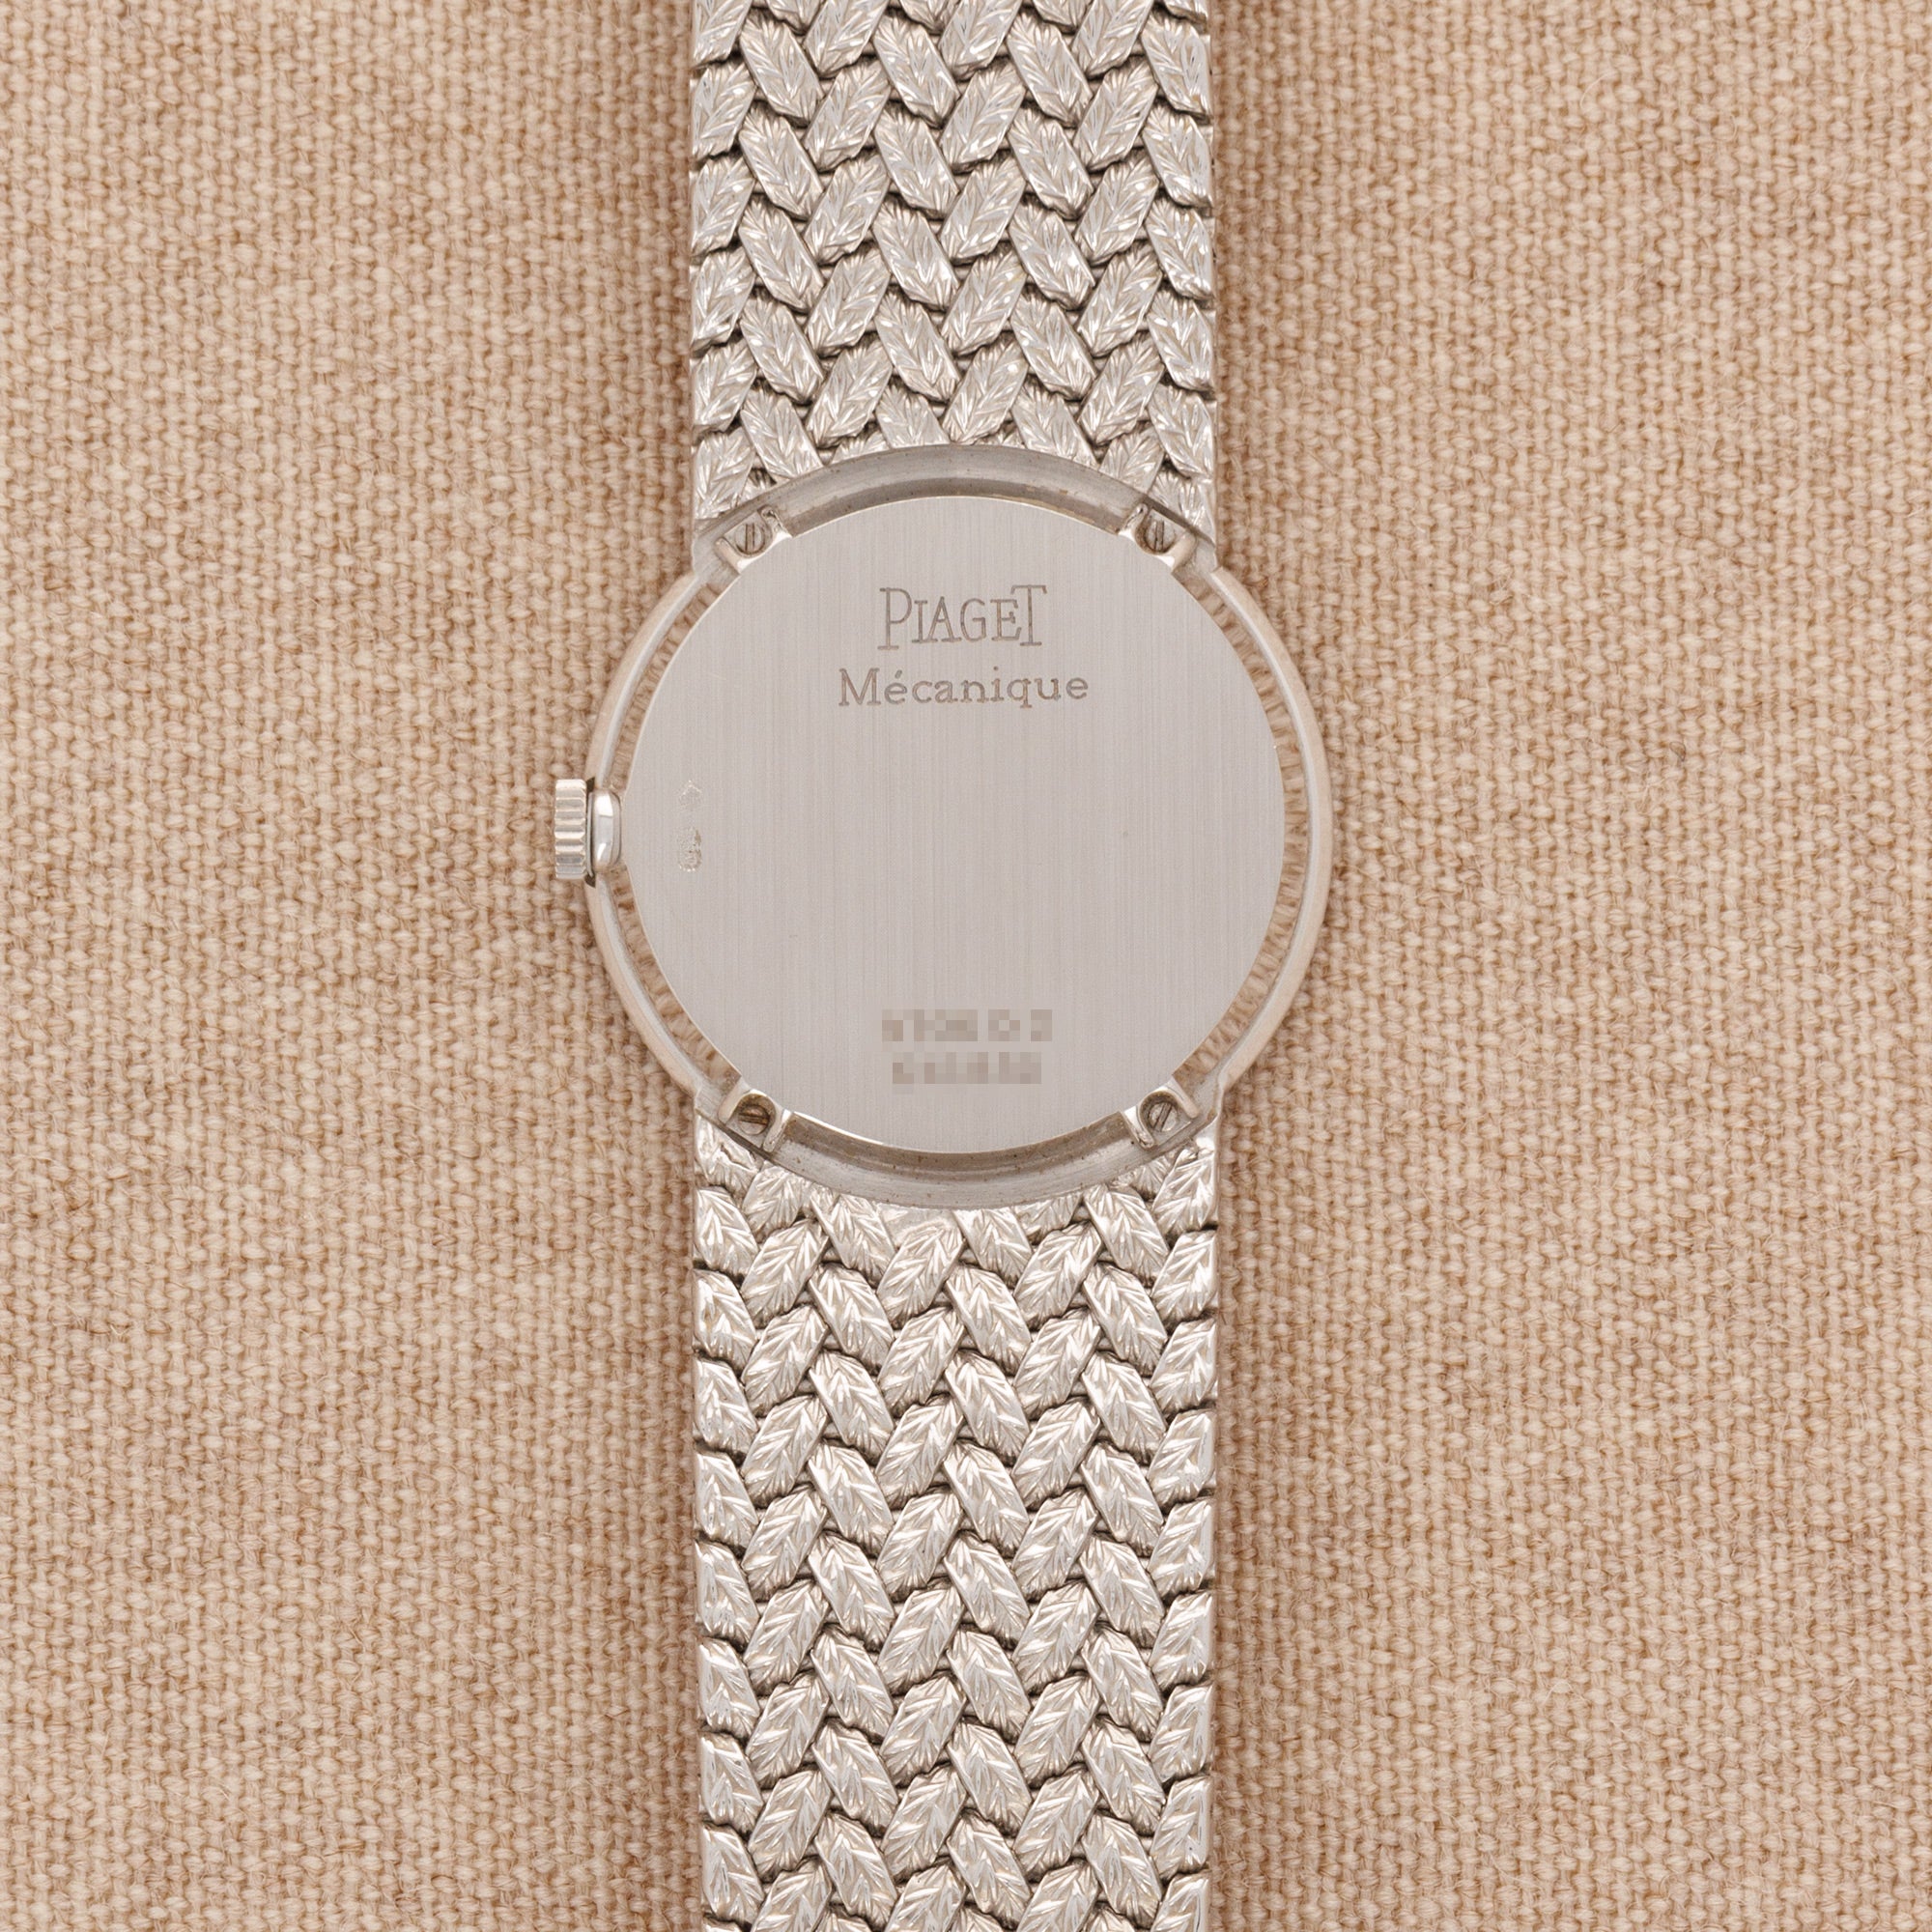 Piaget - Piaget White Gold and Lapis Lazuli Watch Ref. 9706 - The Keystone Watches